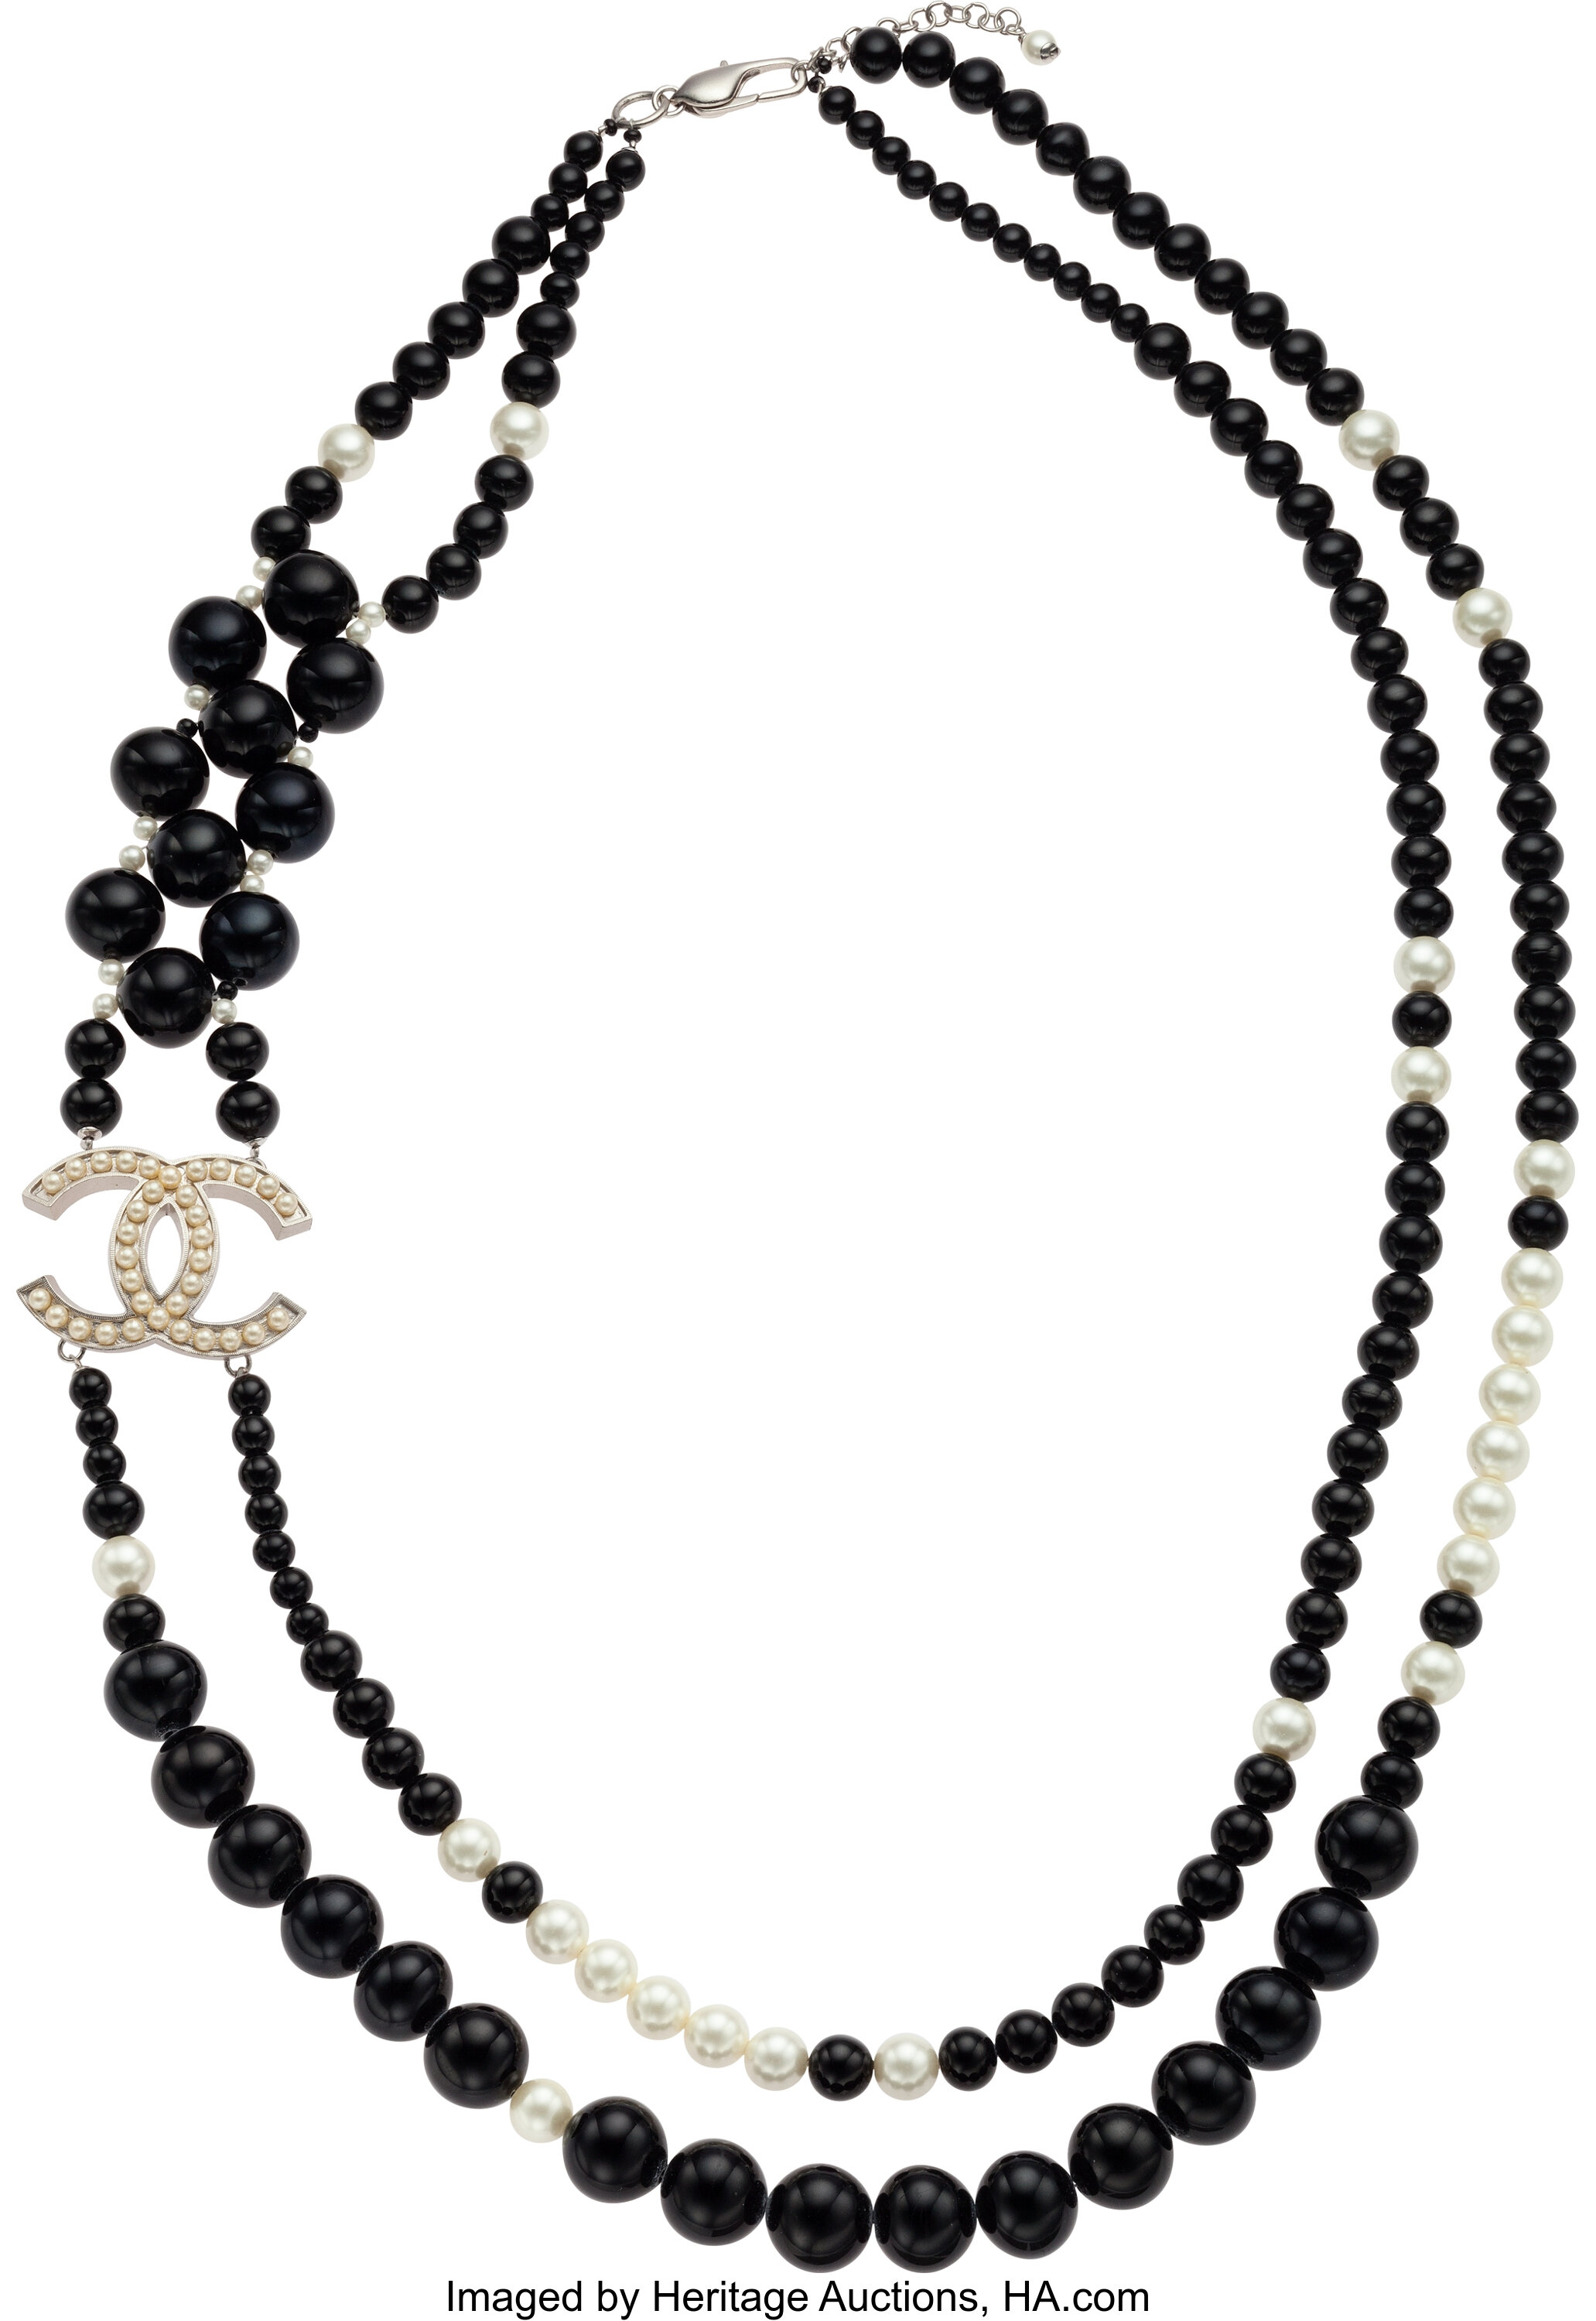 Cc pearls necklace Chanel Black in Pearls - 15714211